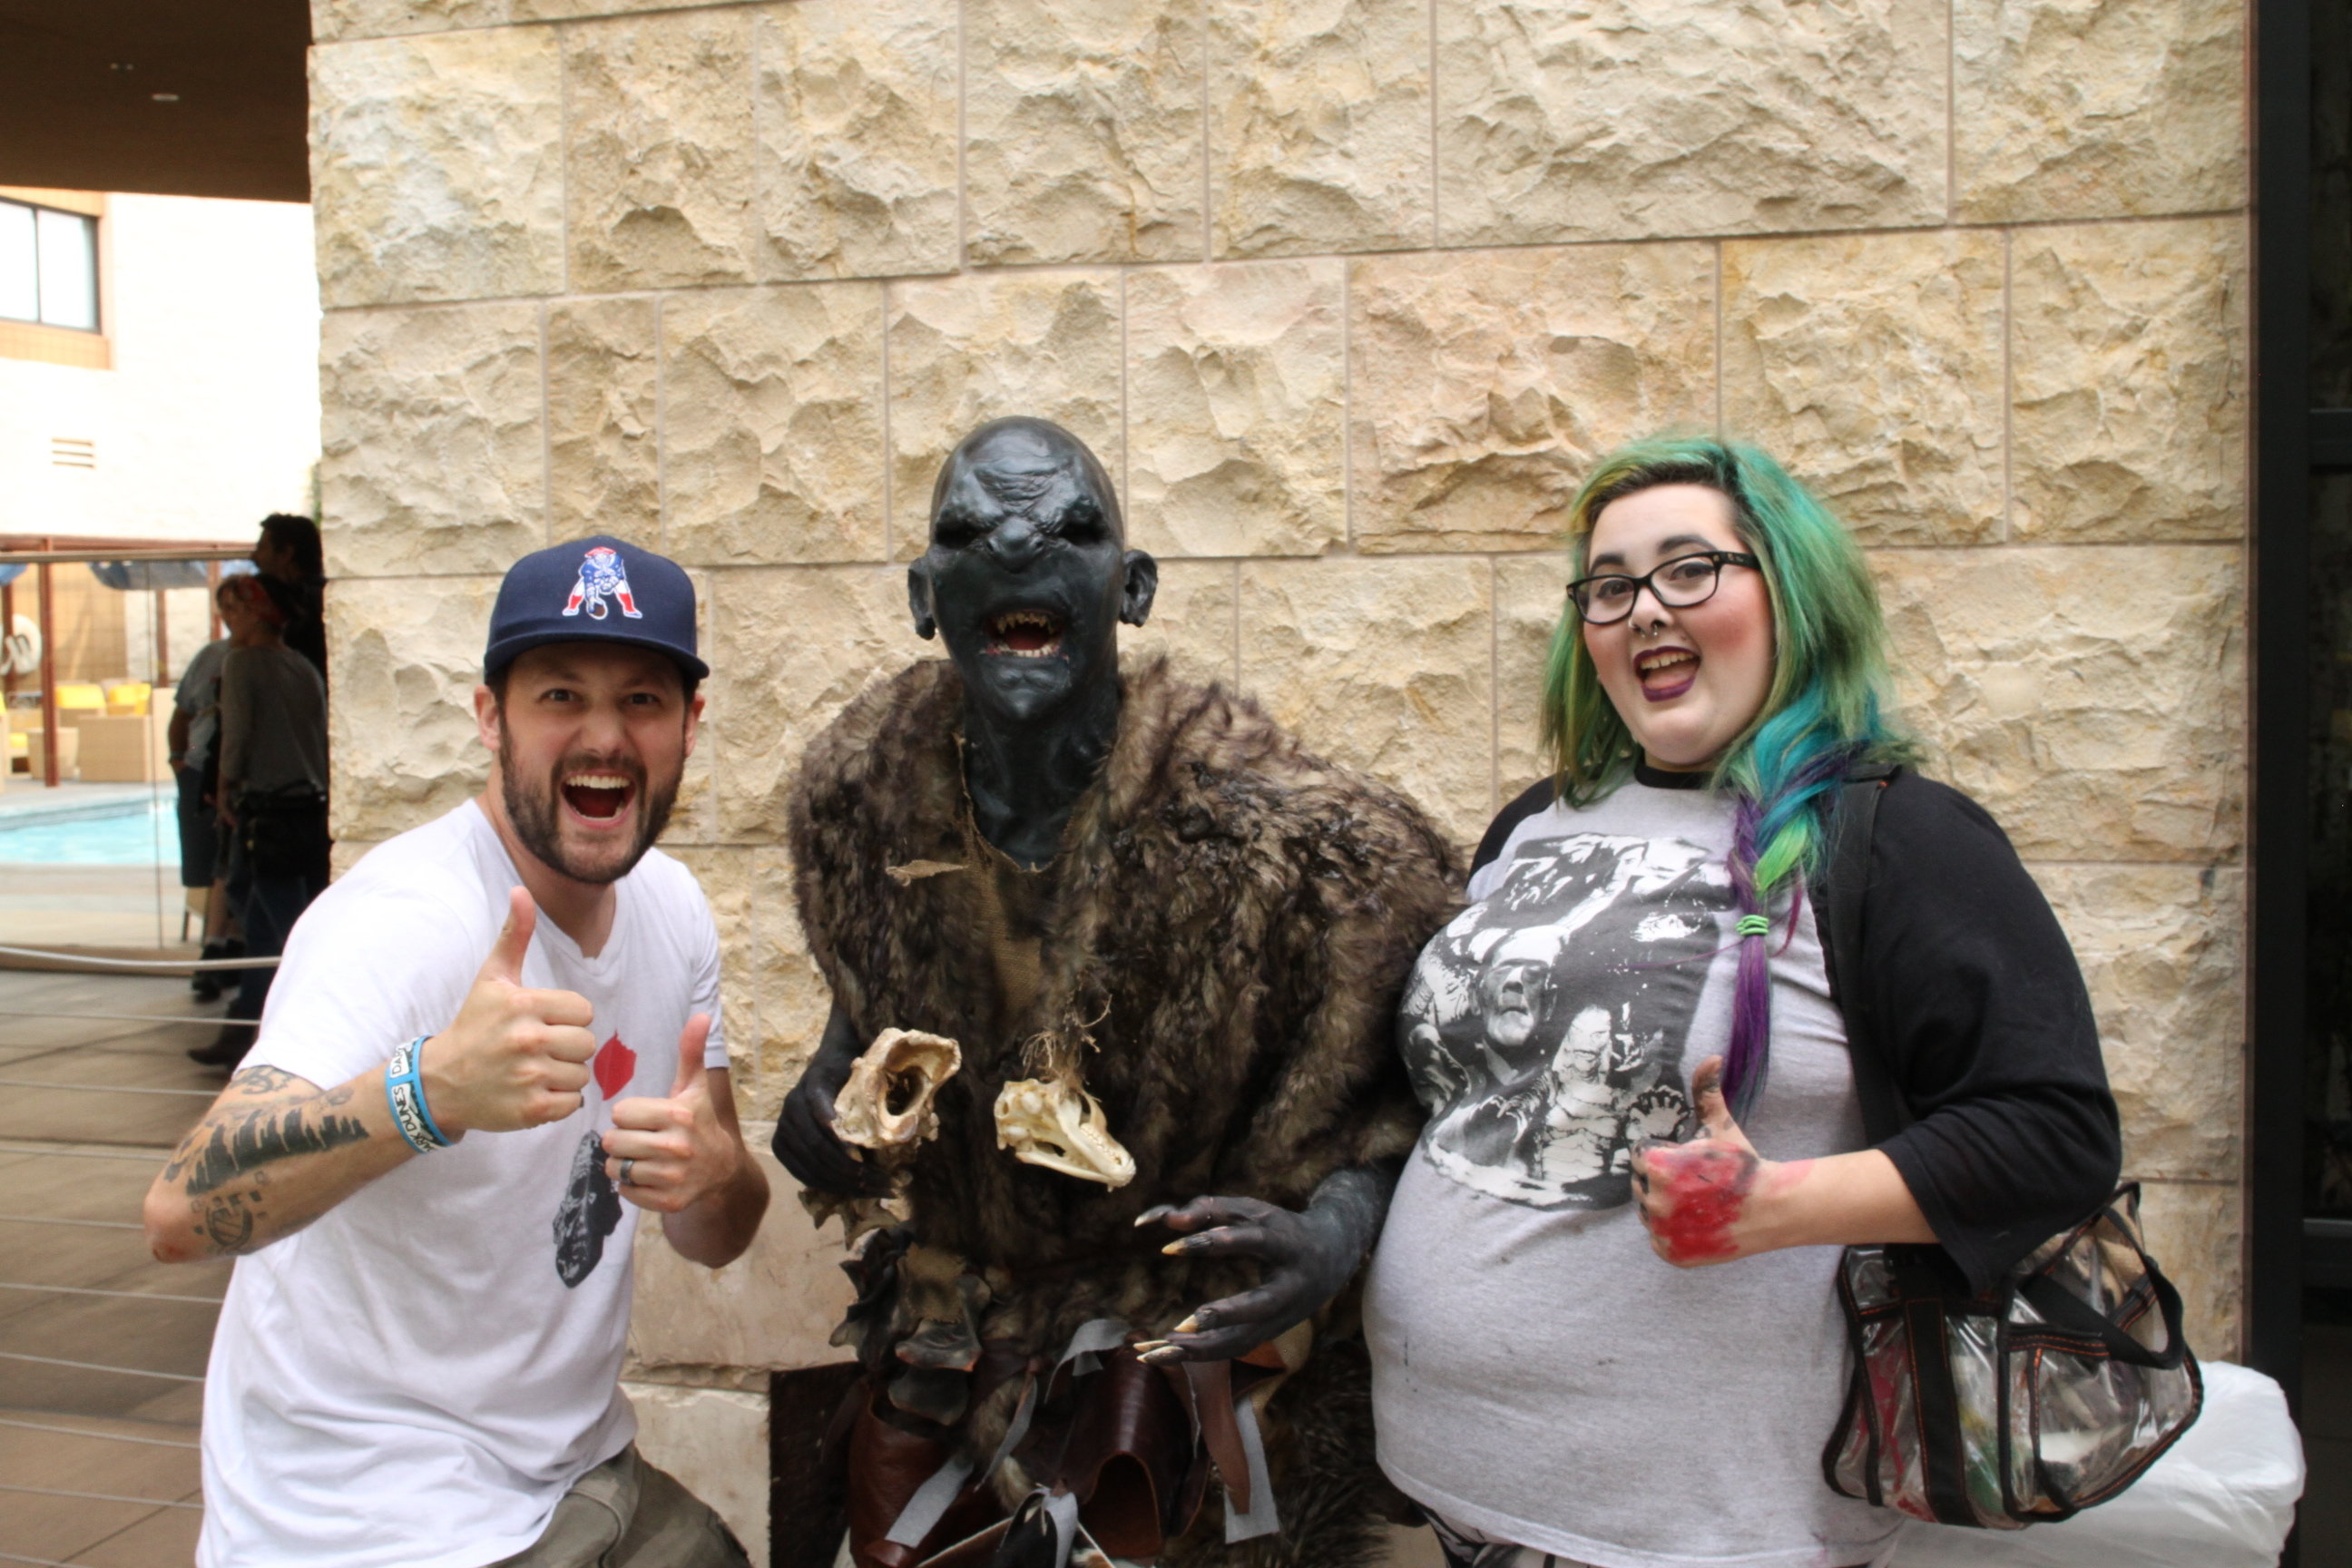 Drew Buerhaus (cinematographer), Alan Maxson (actor) and Melissa Stell (makeup artist) show off the Orc at Monsterpalooza 2014.